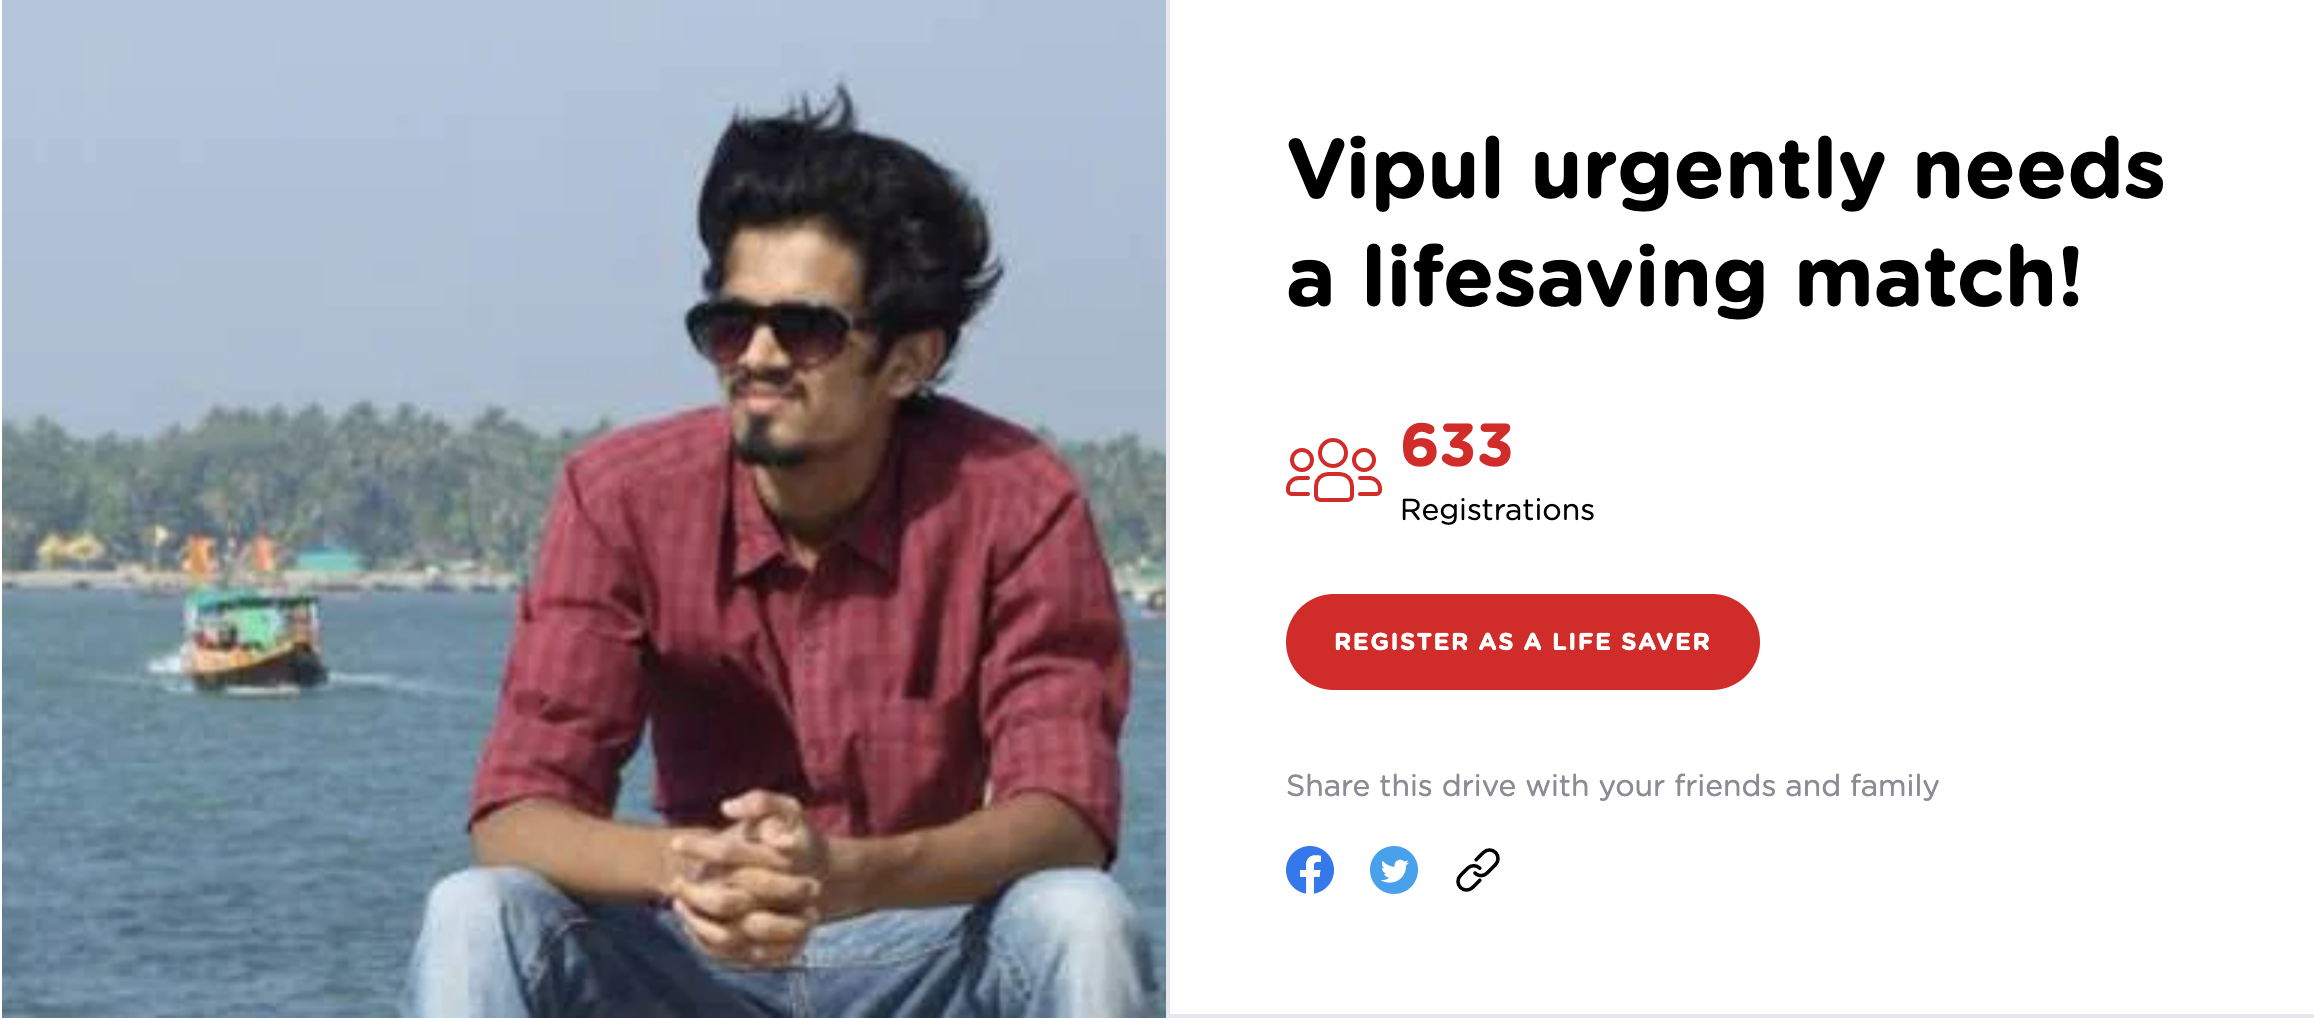 Mumbaikar (Vipul) looking out for a matching blood stem cell donor